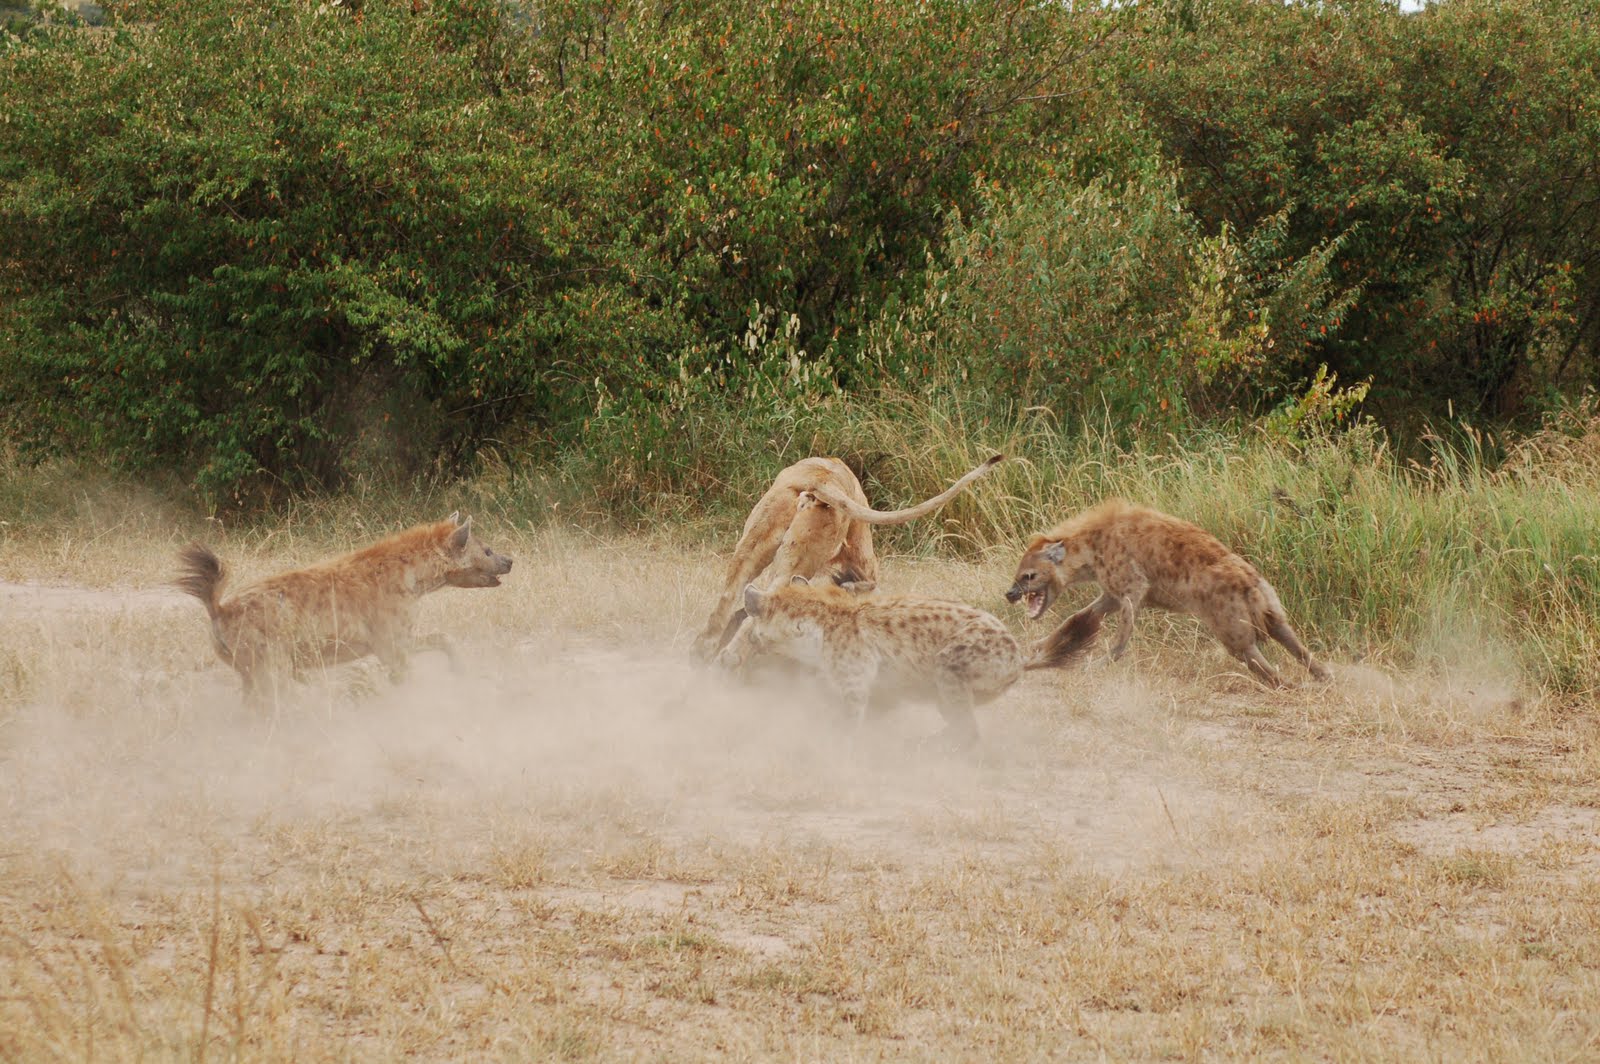  Three spotted hyenas try to encircle a lioness, who is running away toward tall grass, kicking up a cloud of dust.